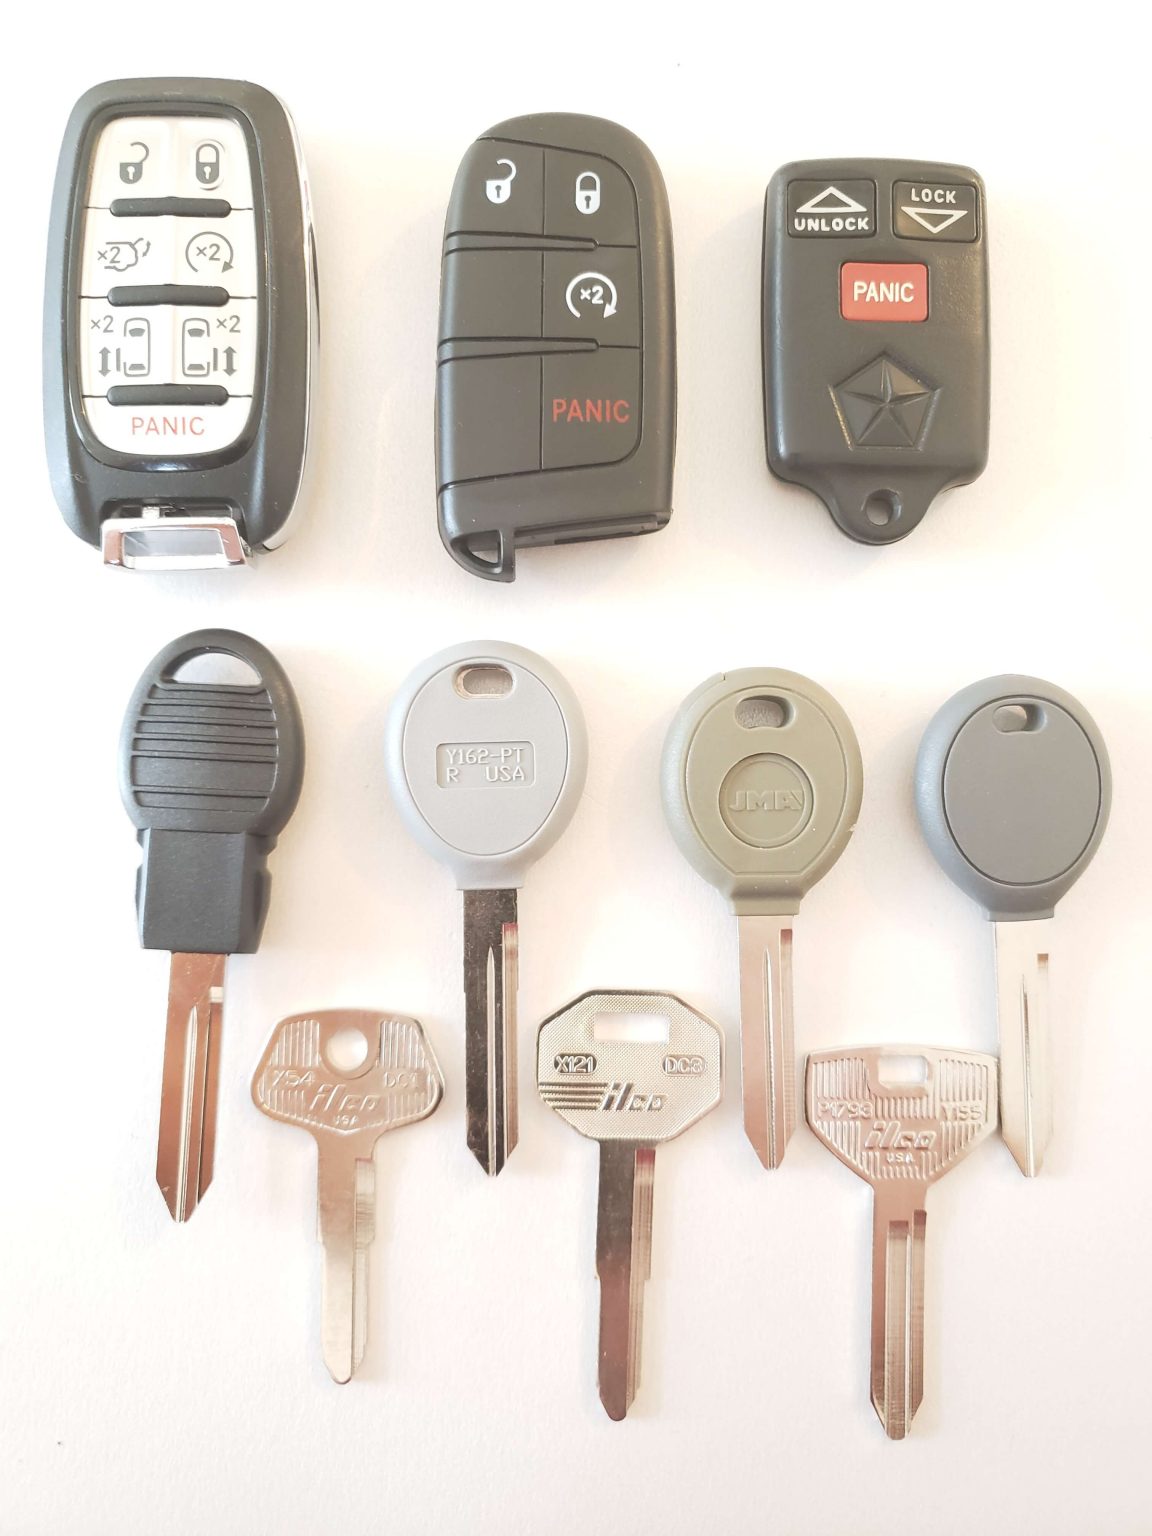 Lost Car Keys Replacement - All You Need to Know in One Place